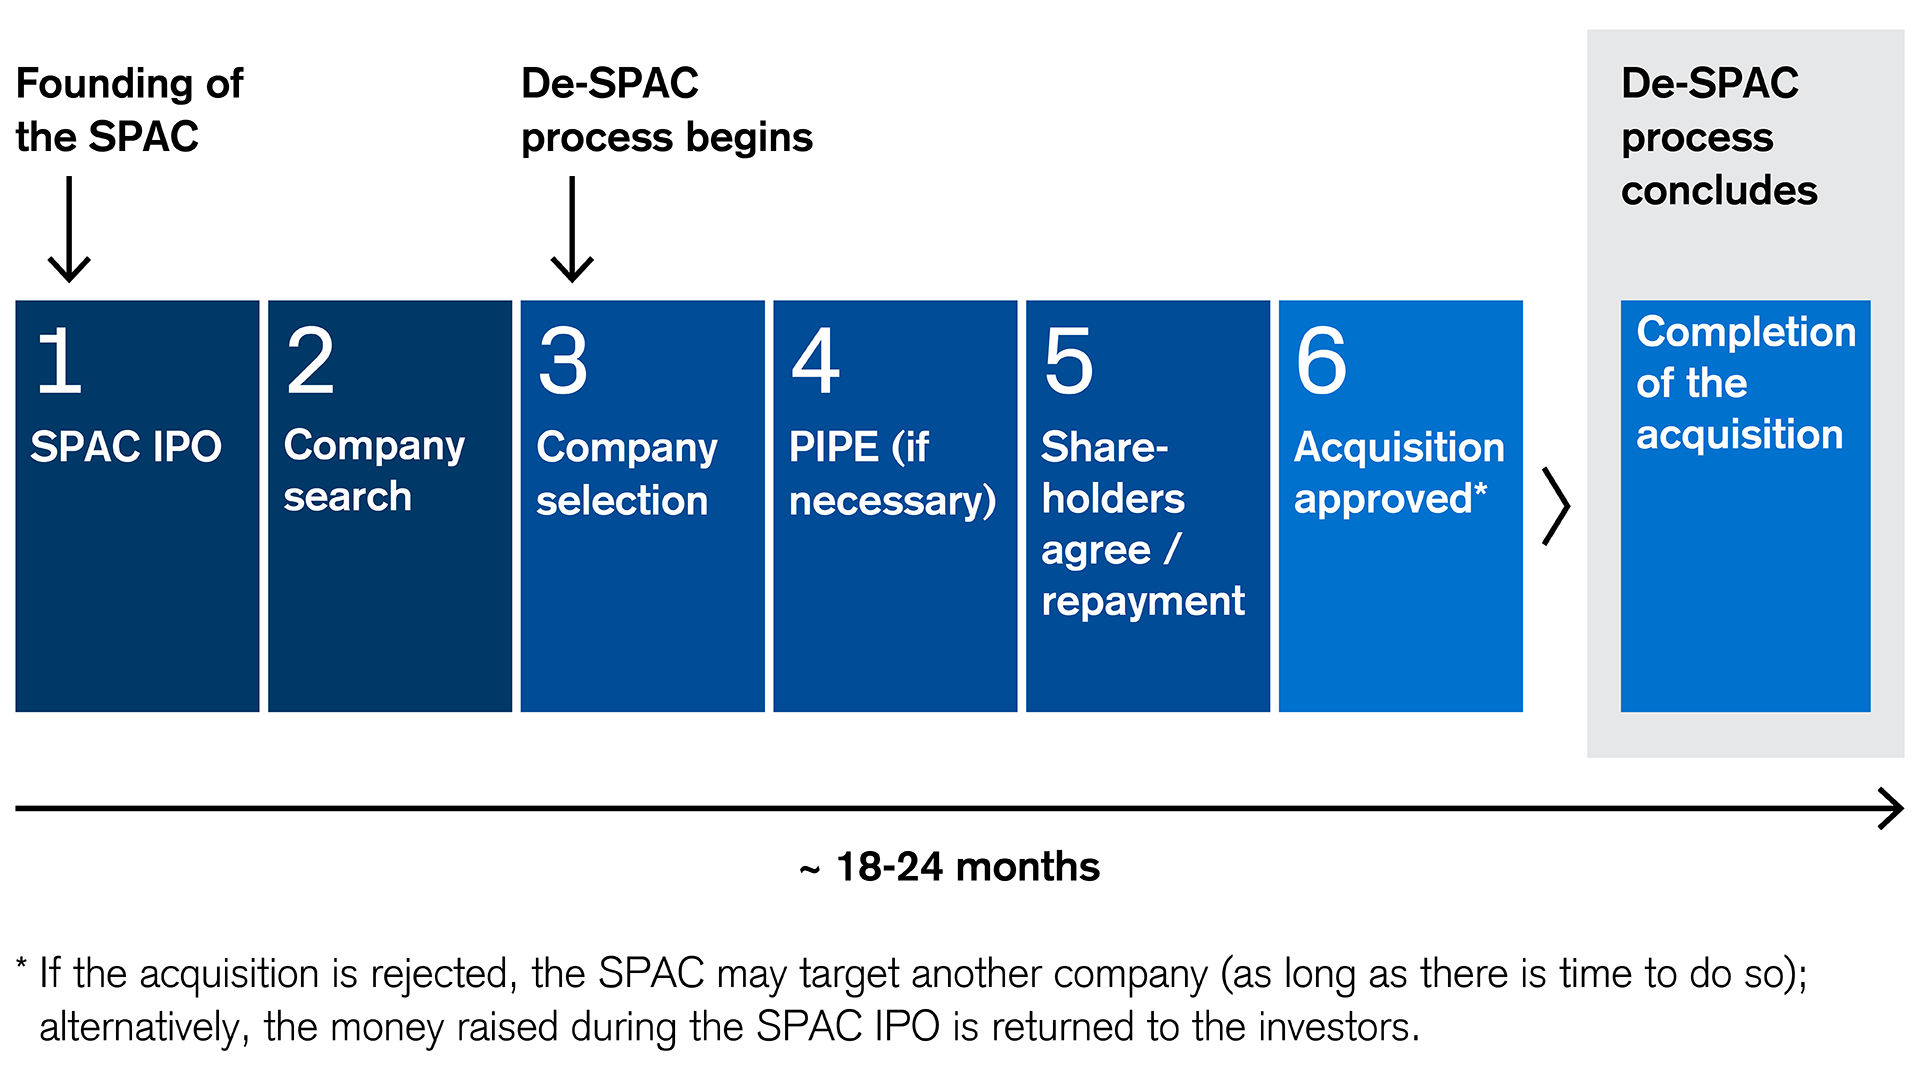 SPAC: Six-step process from foundation to acquisition